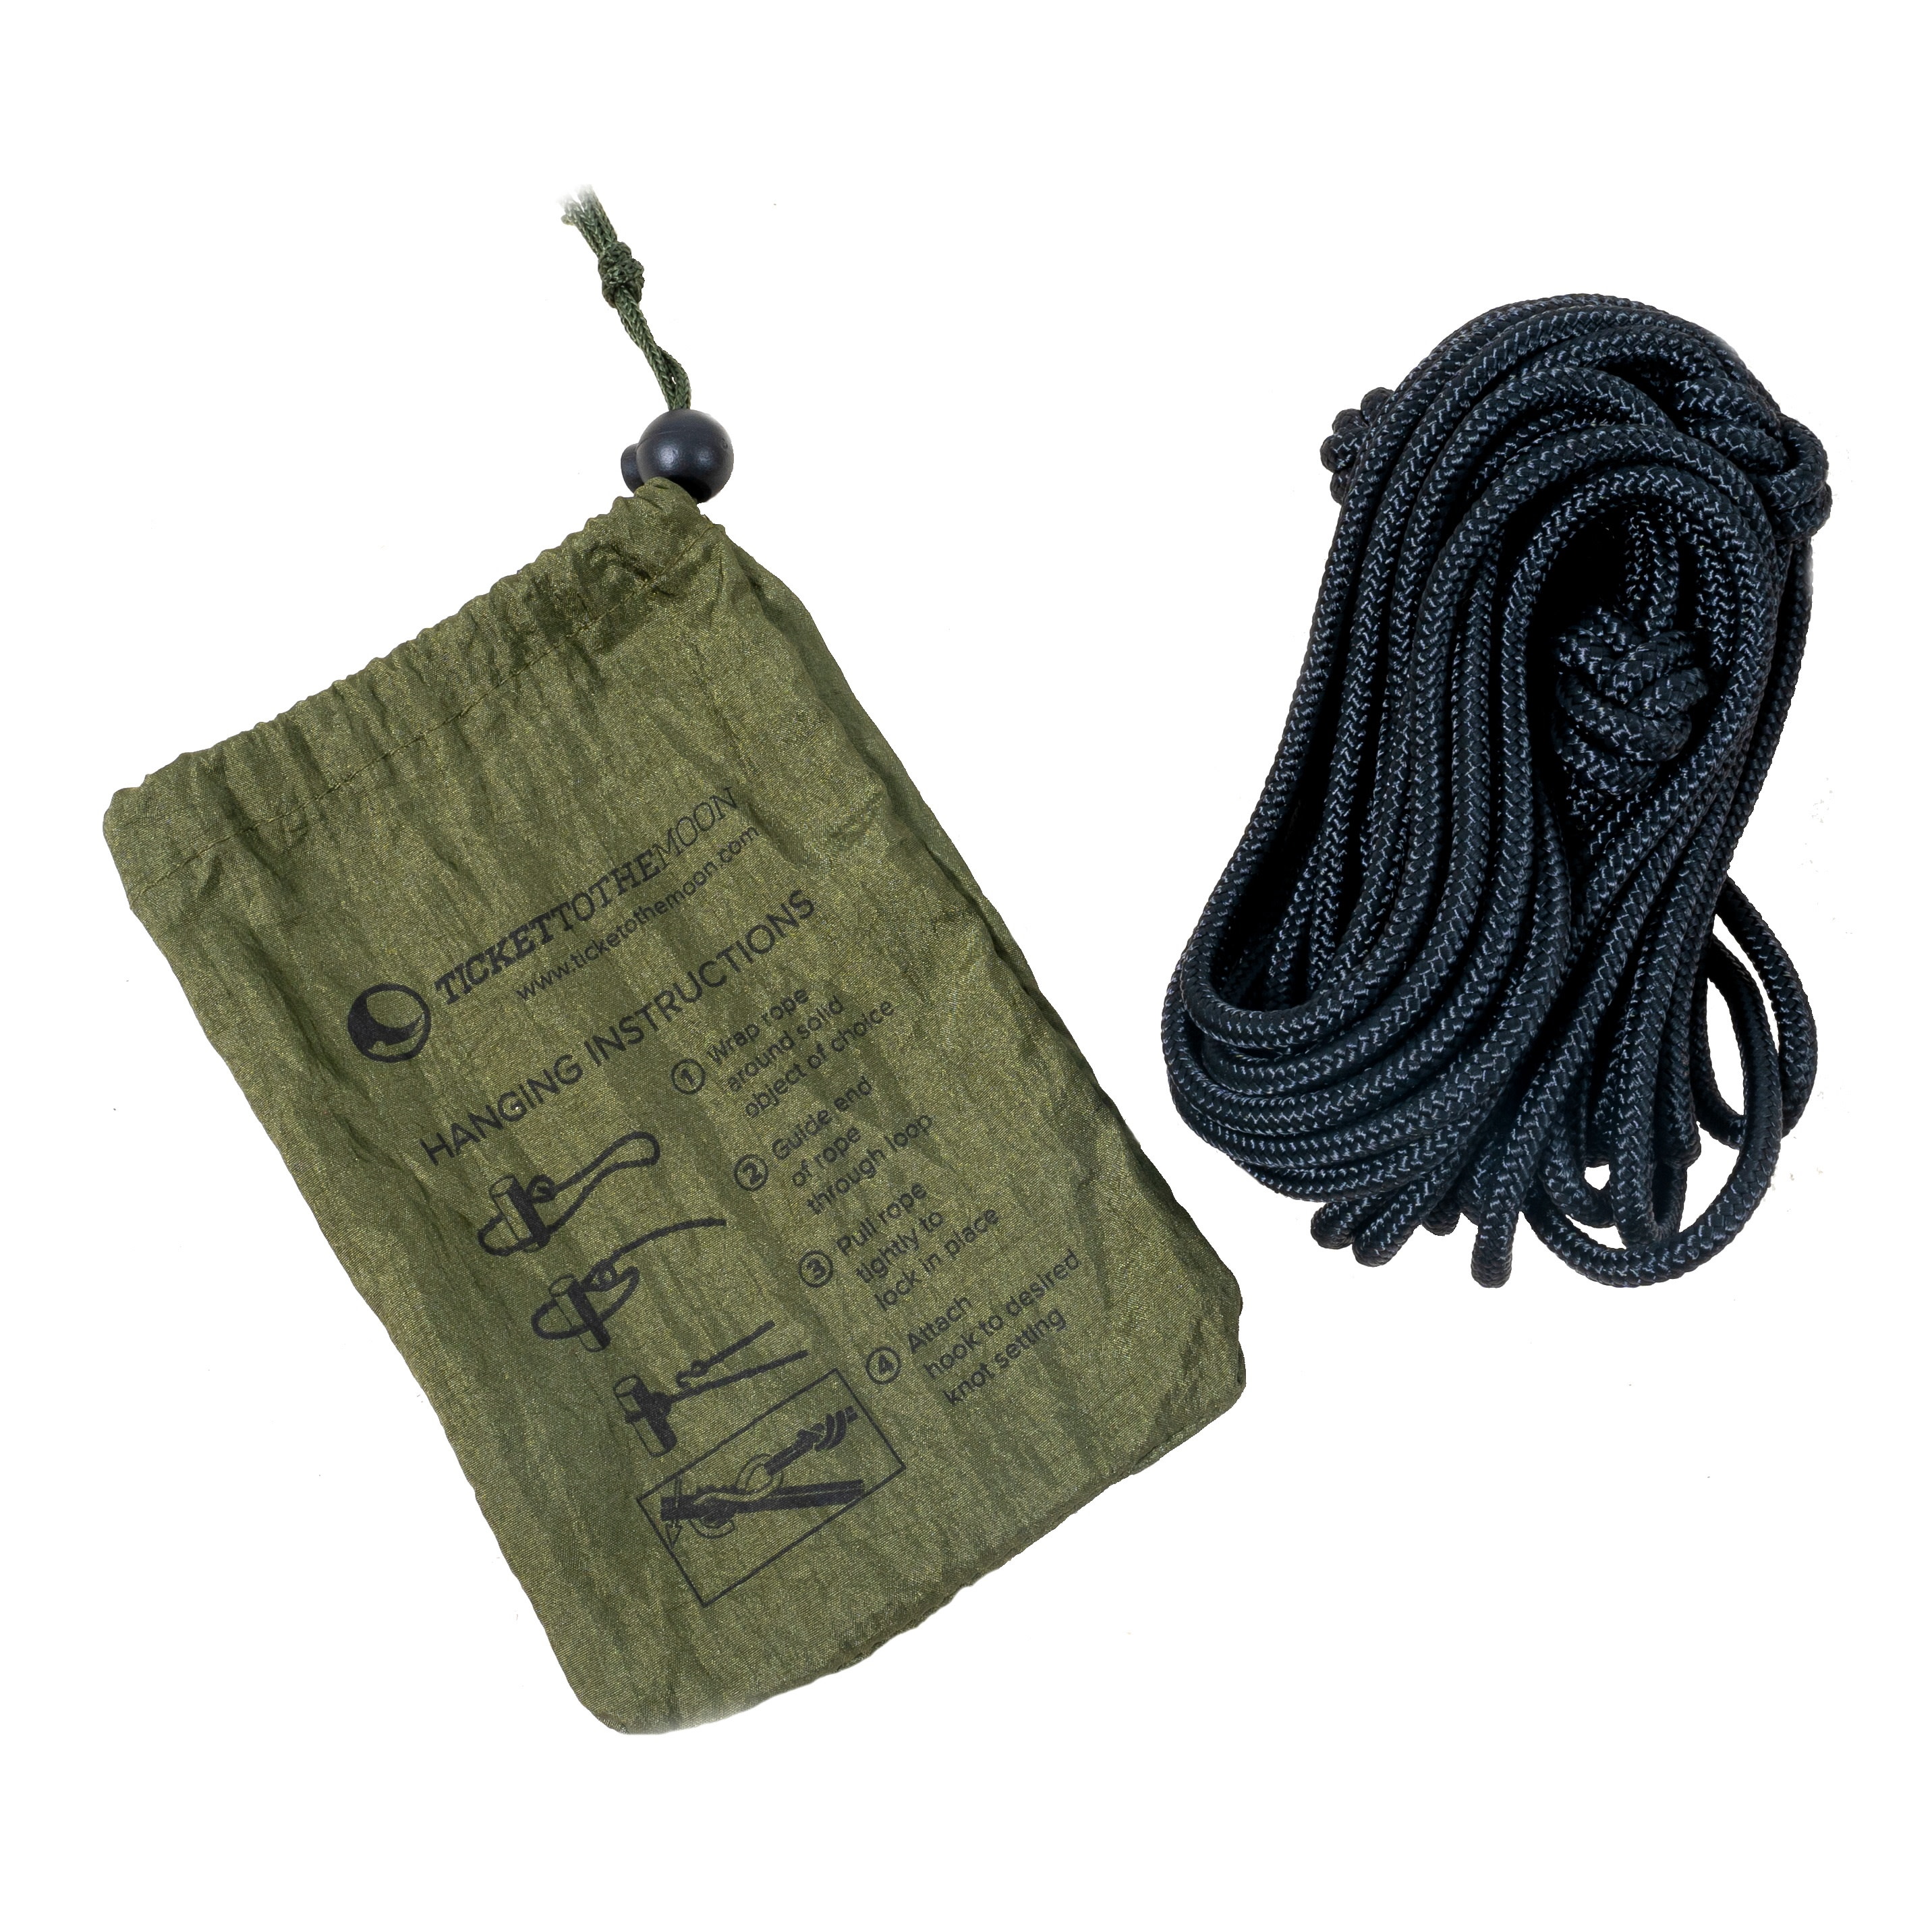 Ticket to the Moon Hammock Attachment Rope Pouch sort